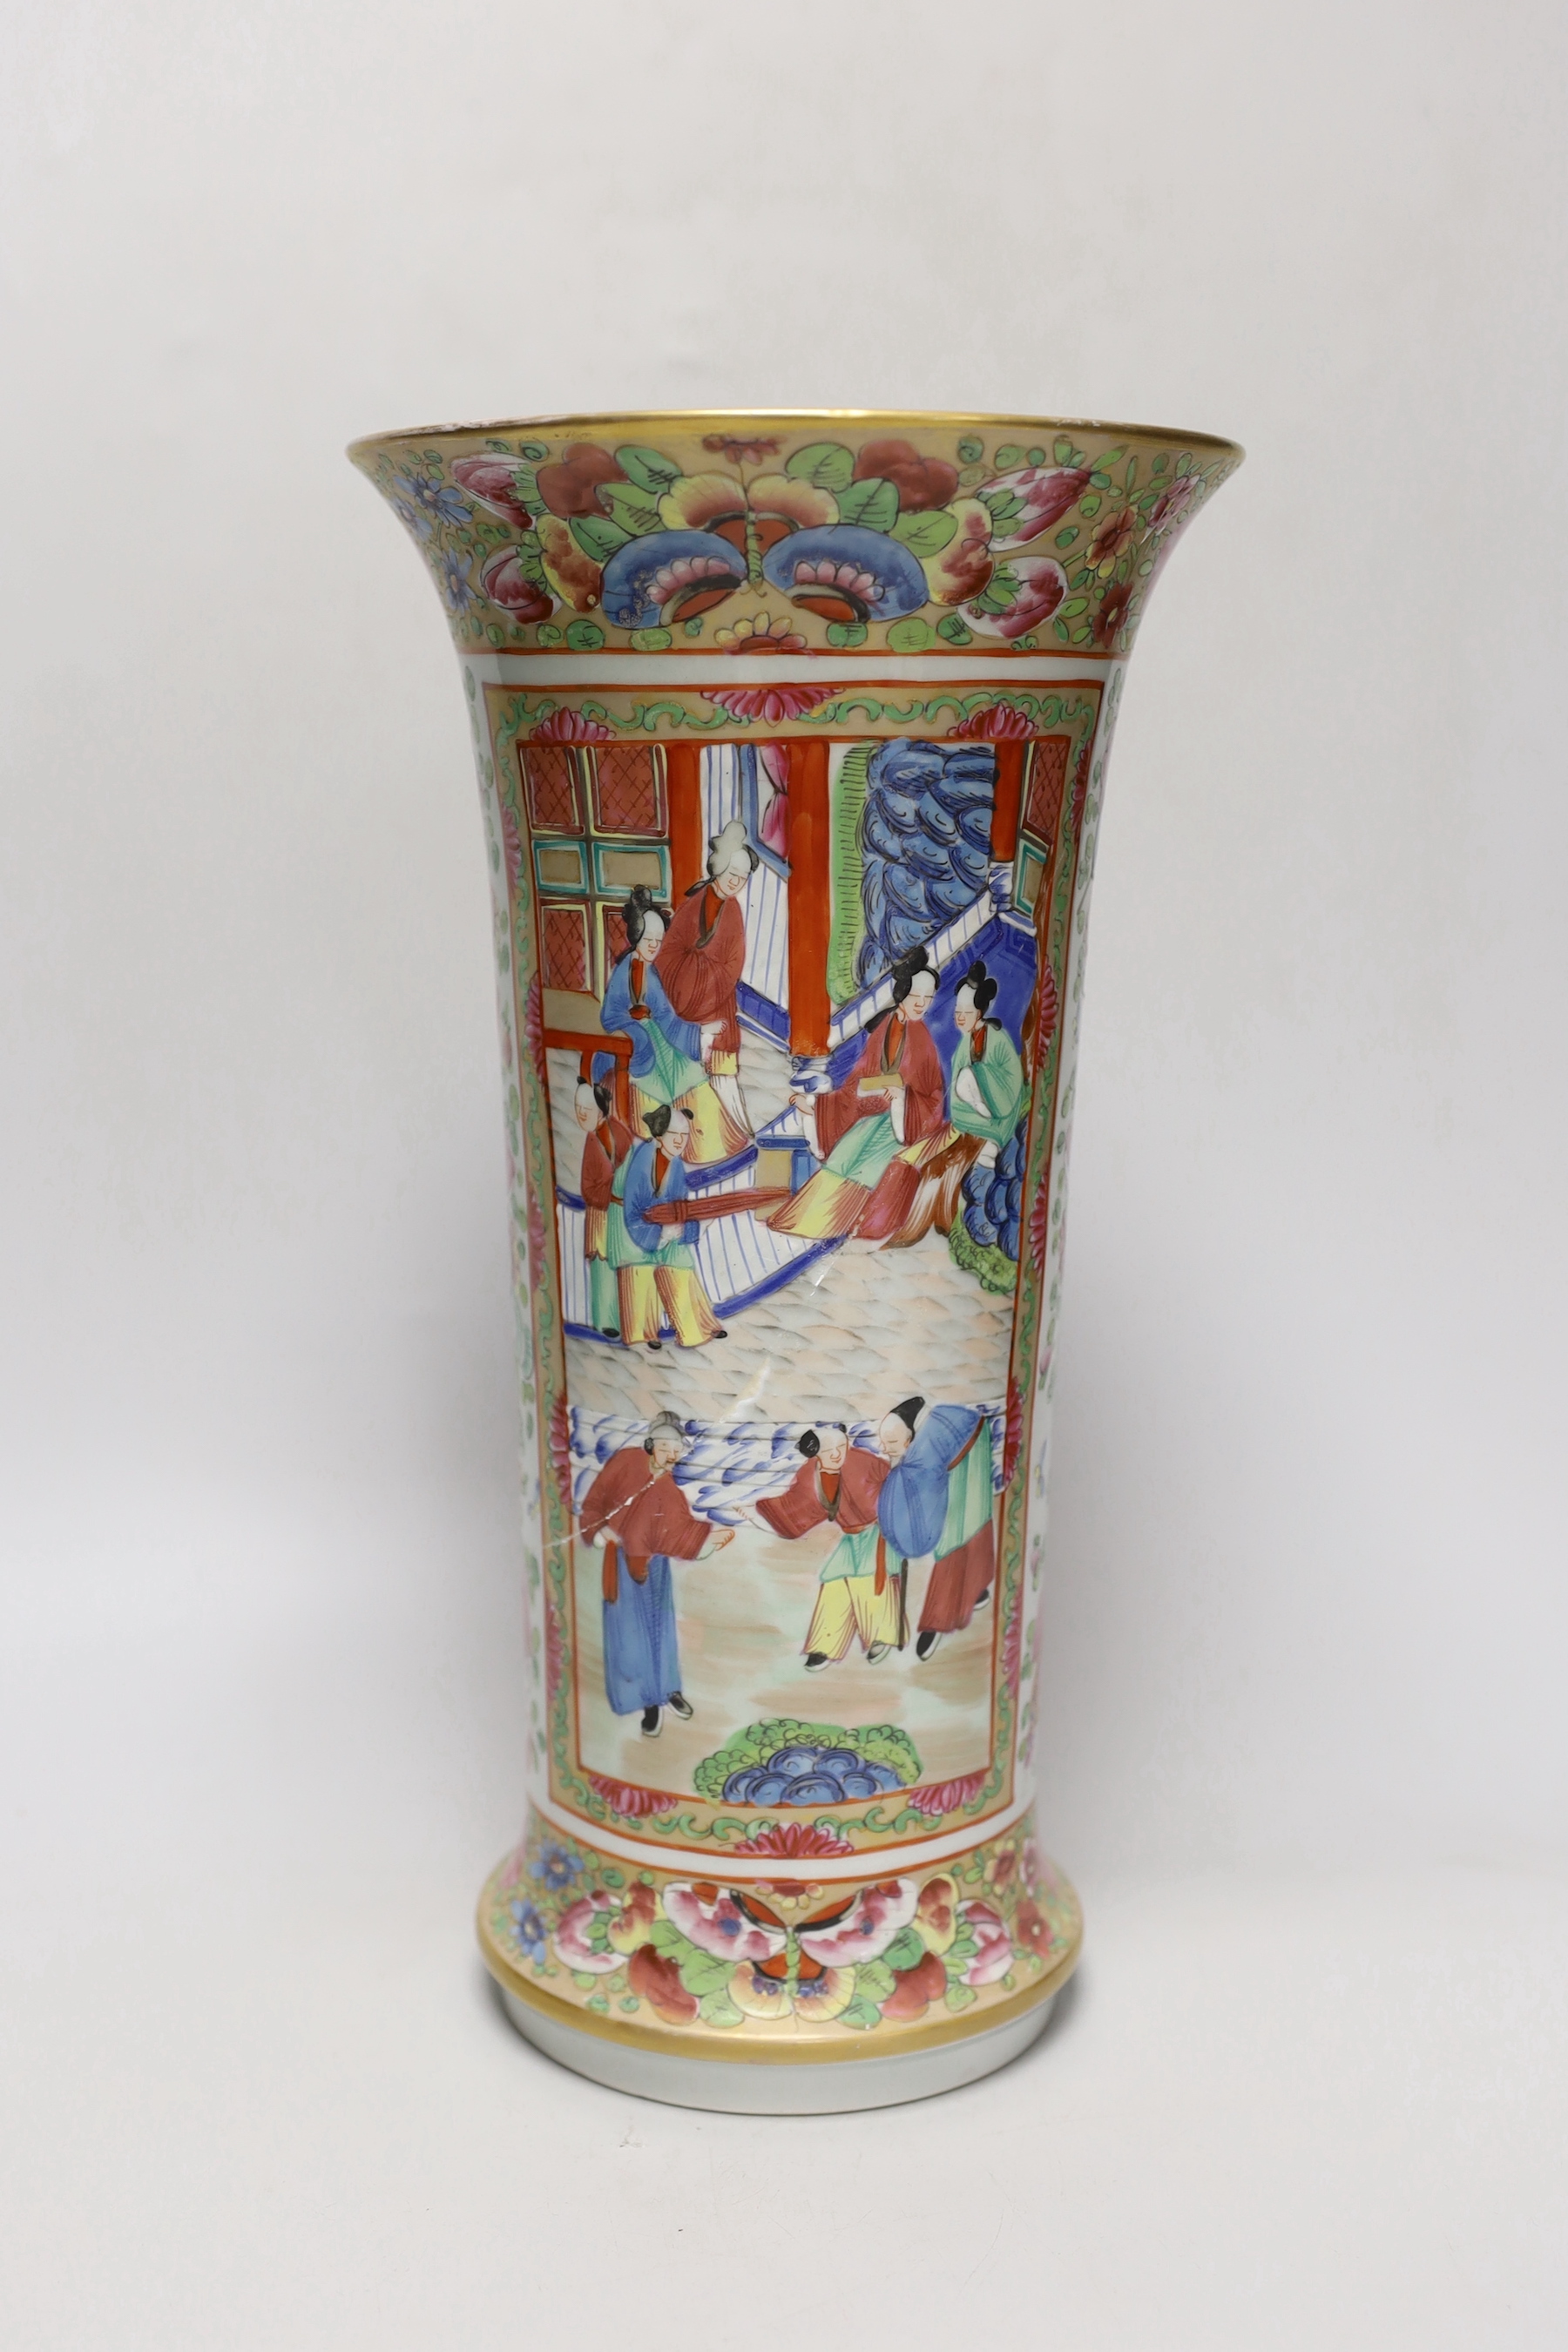 A Chinese Canton decorated famille rose trumpet vase, 33cm high (a.f.)